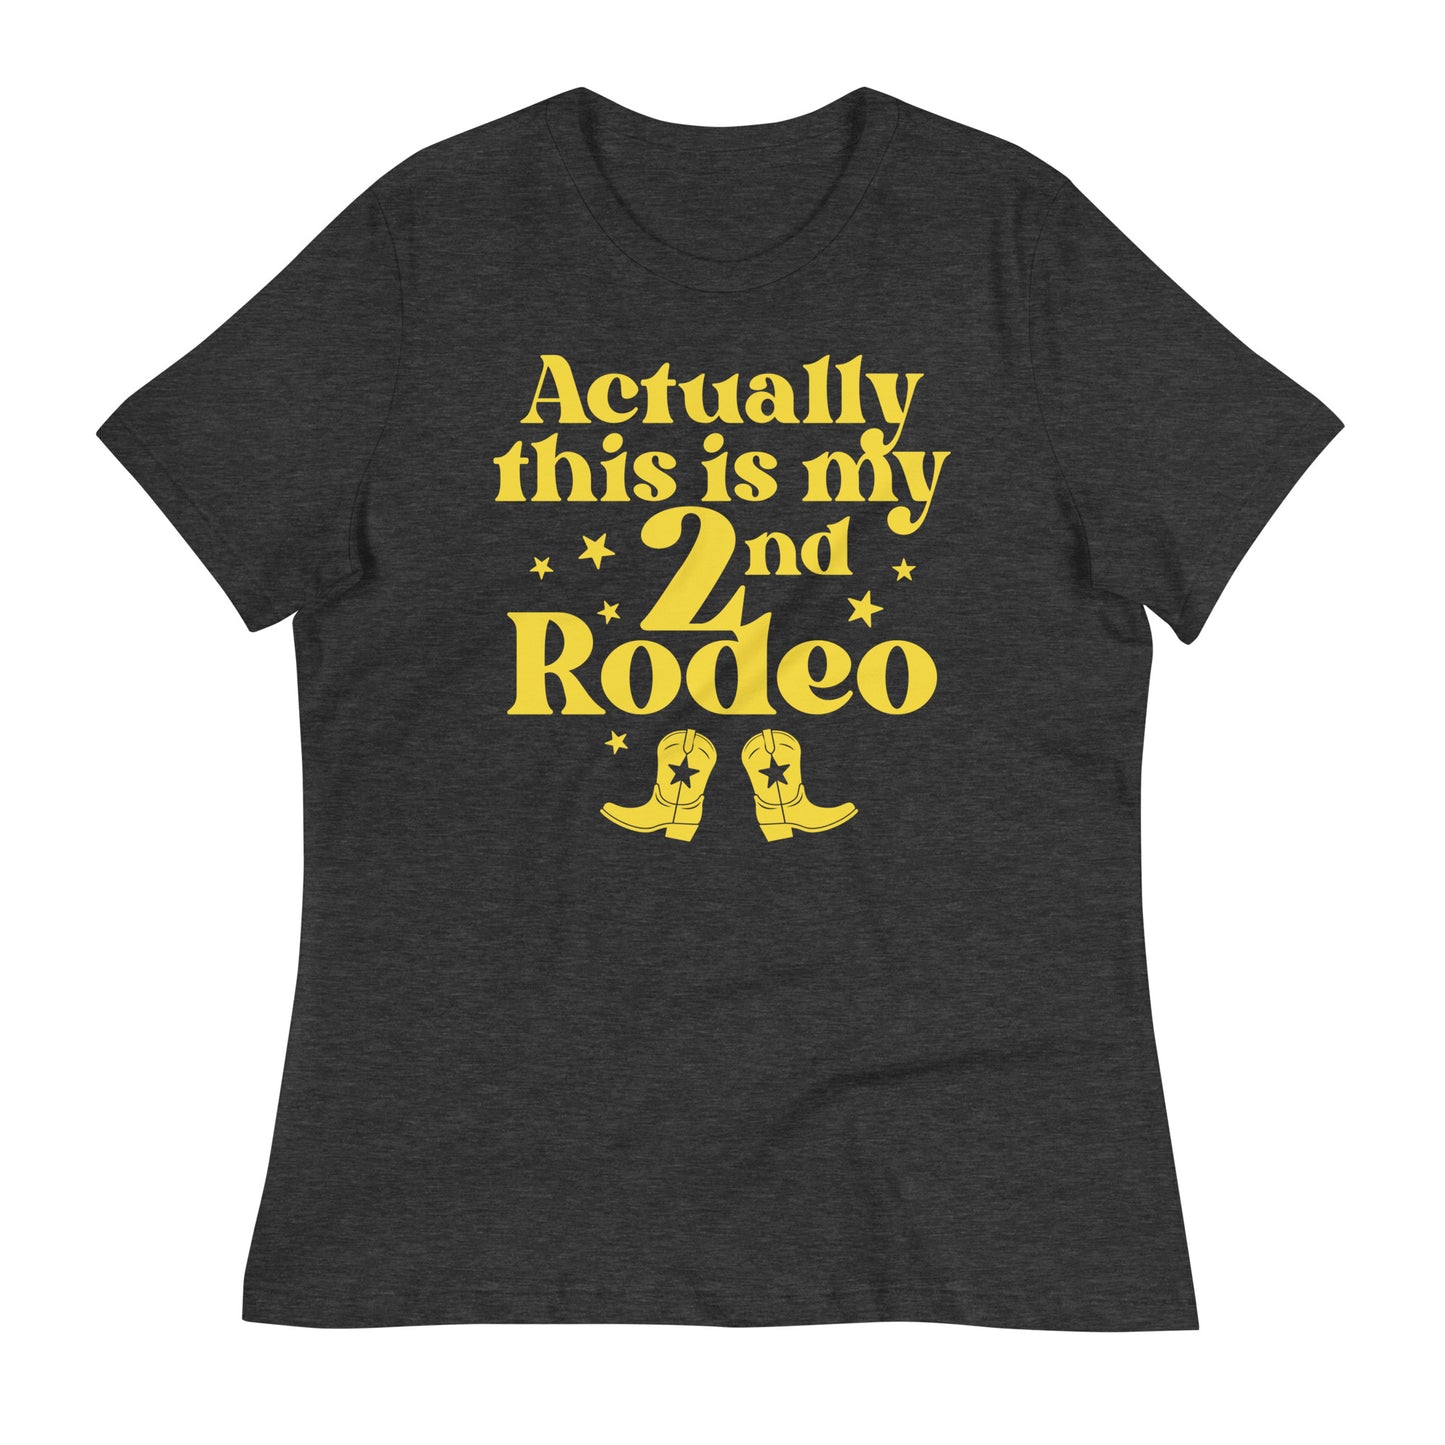 Actually This Is My 2nd Rodeo Women's Signature Tee